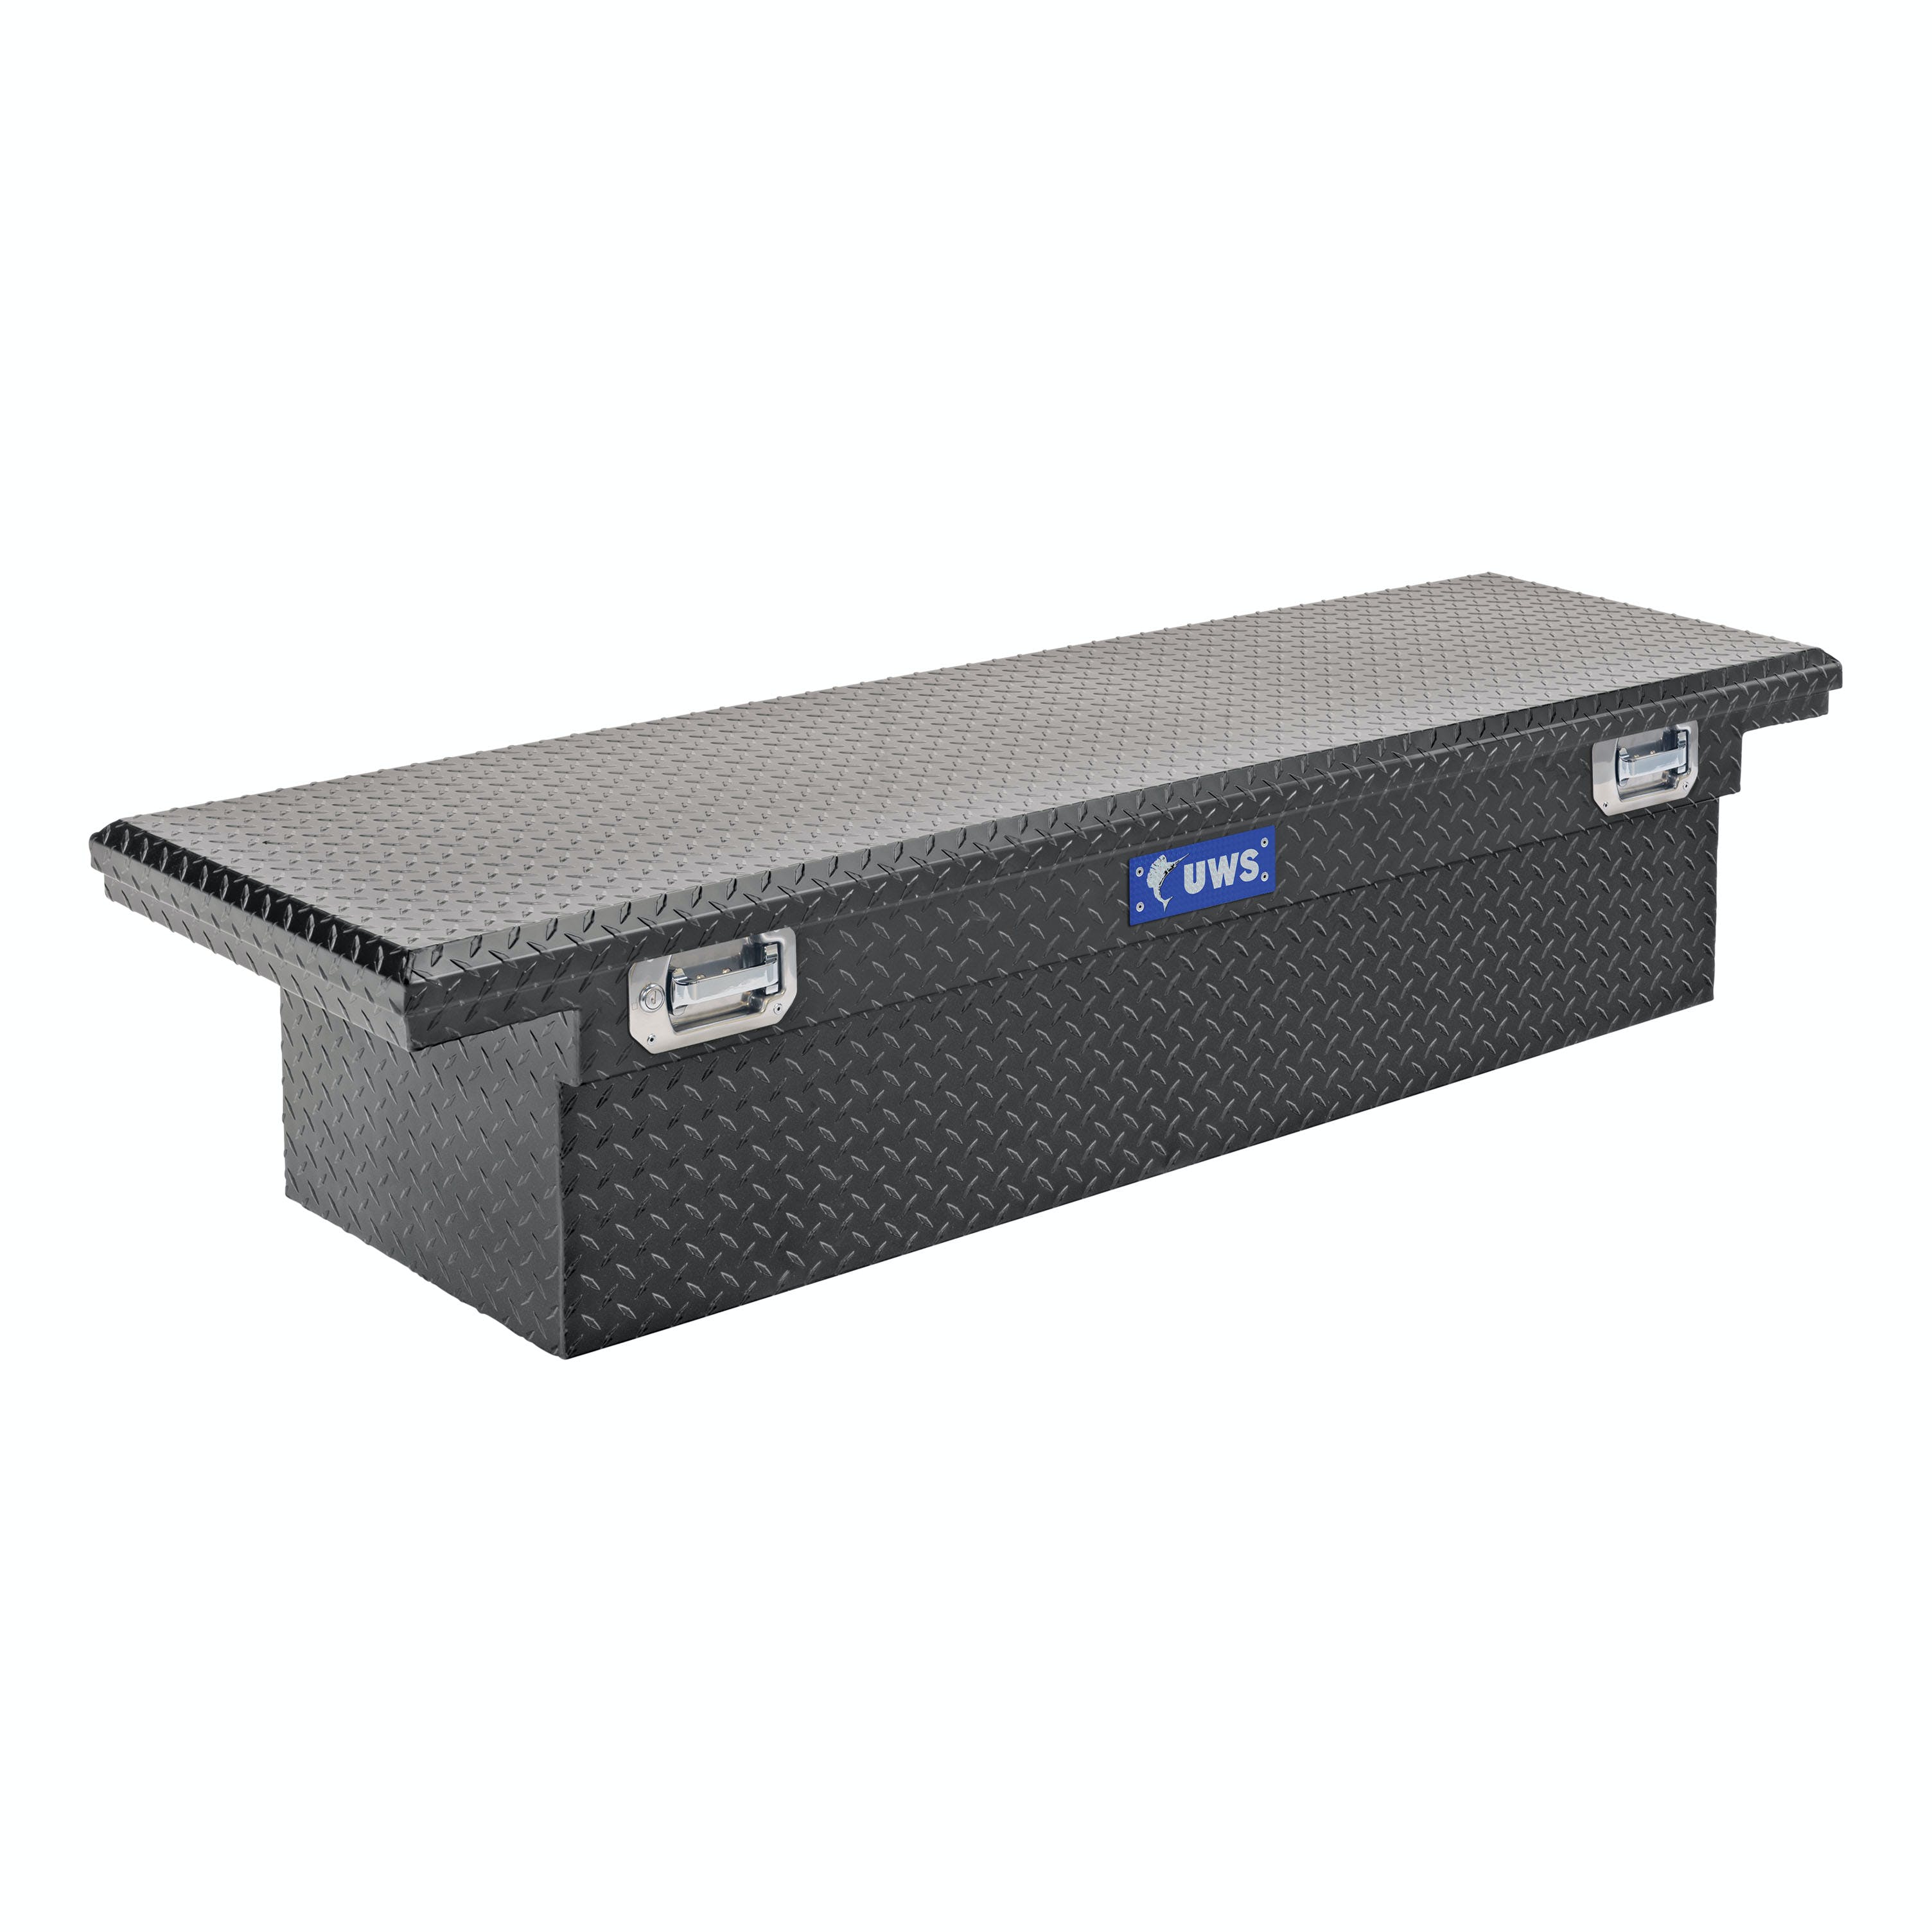 UWS TBS-69-LP-PH-MB 69 inch Aluminum Single Lid Crossover Toolbox Pull Handle Low Profile Matte Black